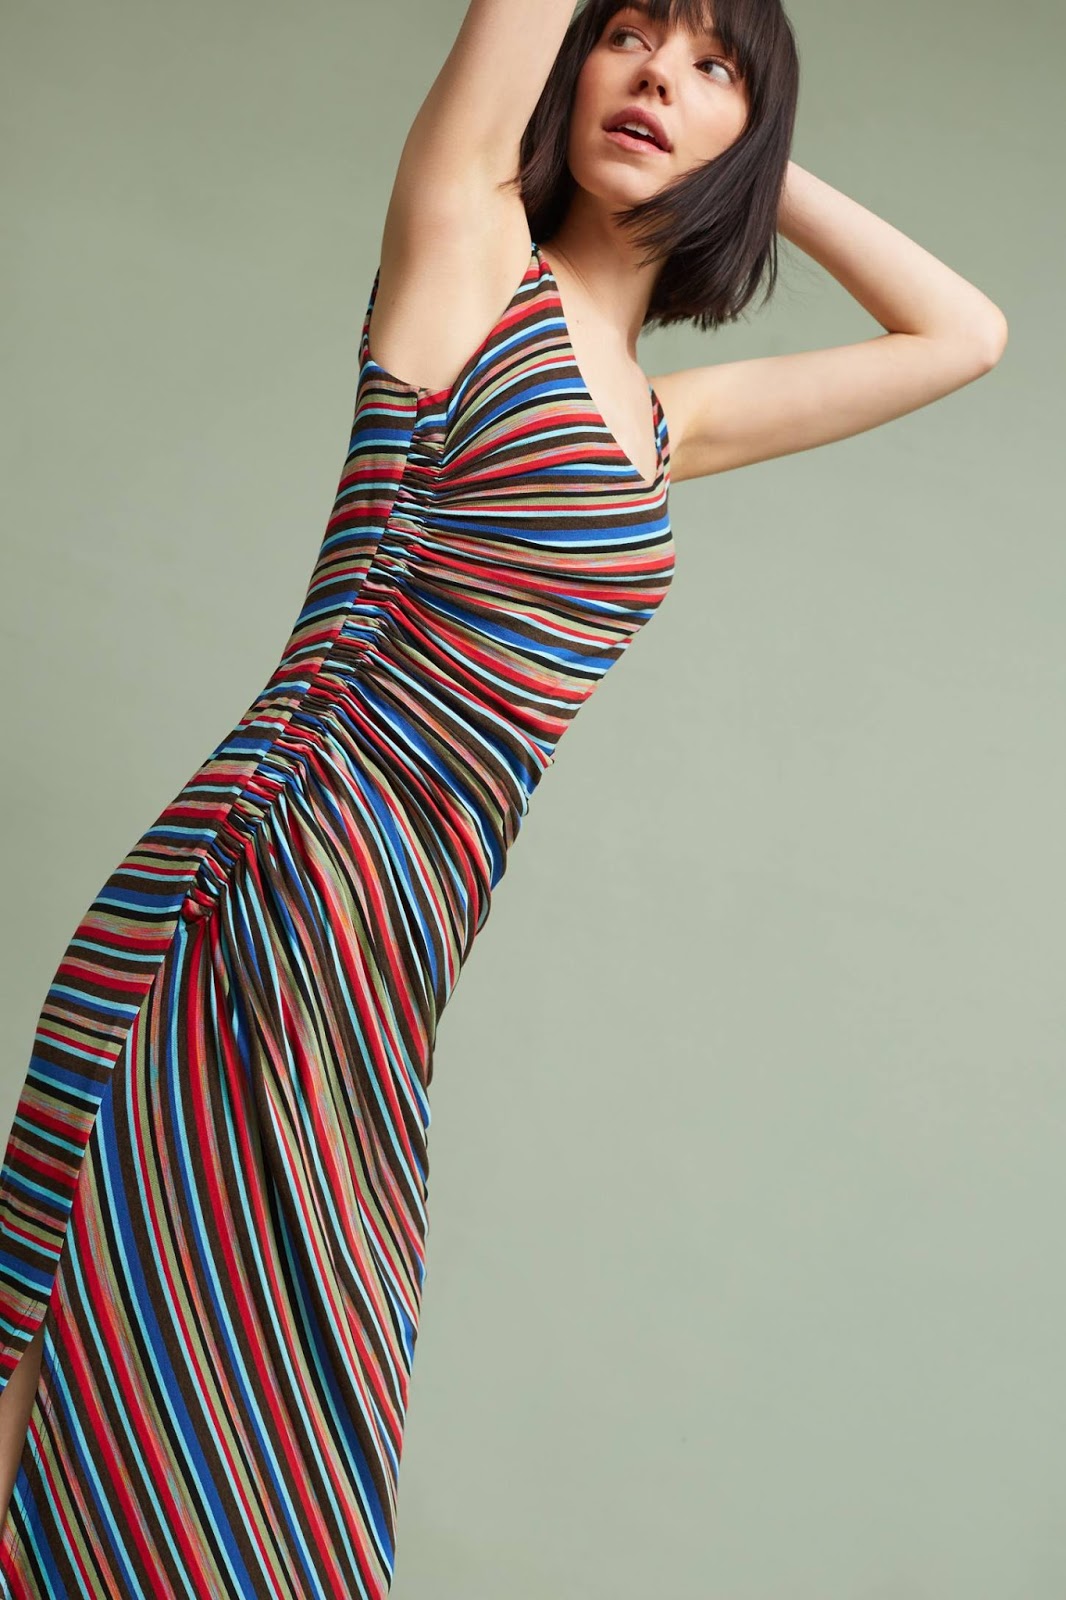 Shop Anthropologie's dresses first during their June pre-shop!